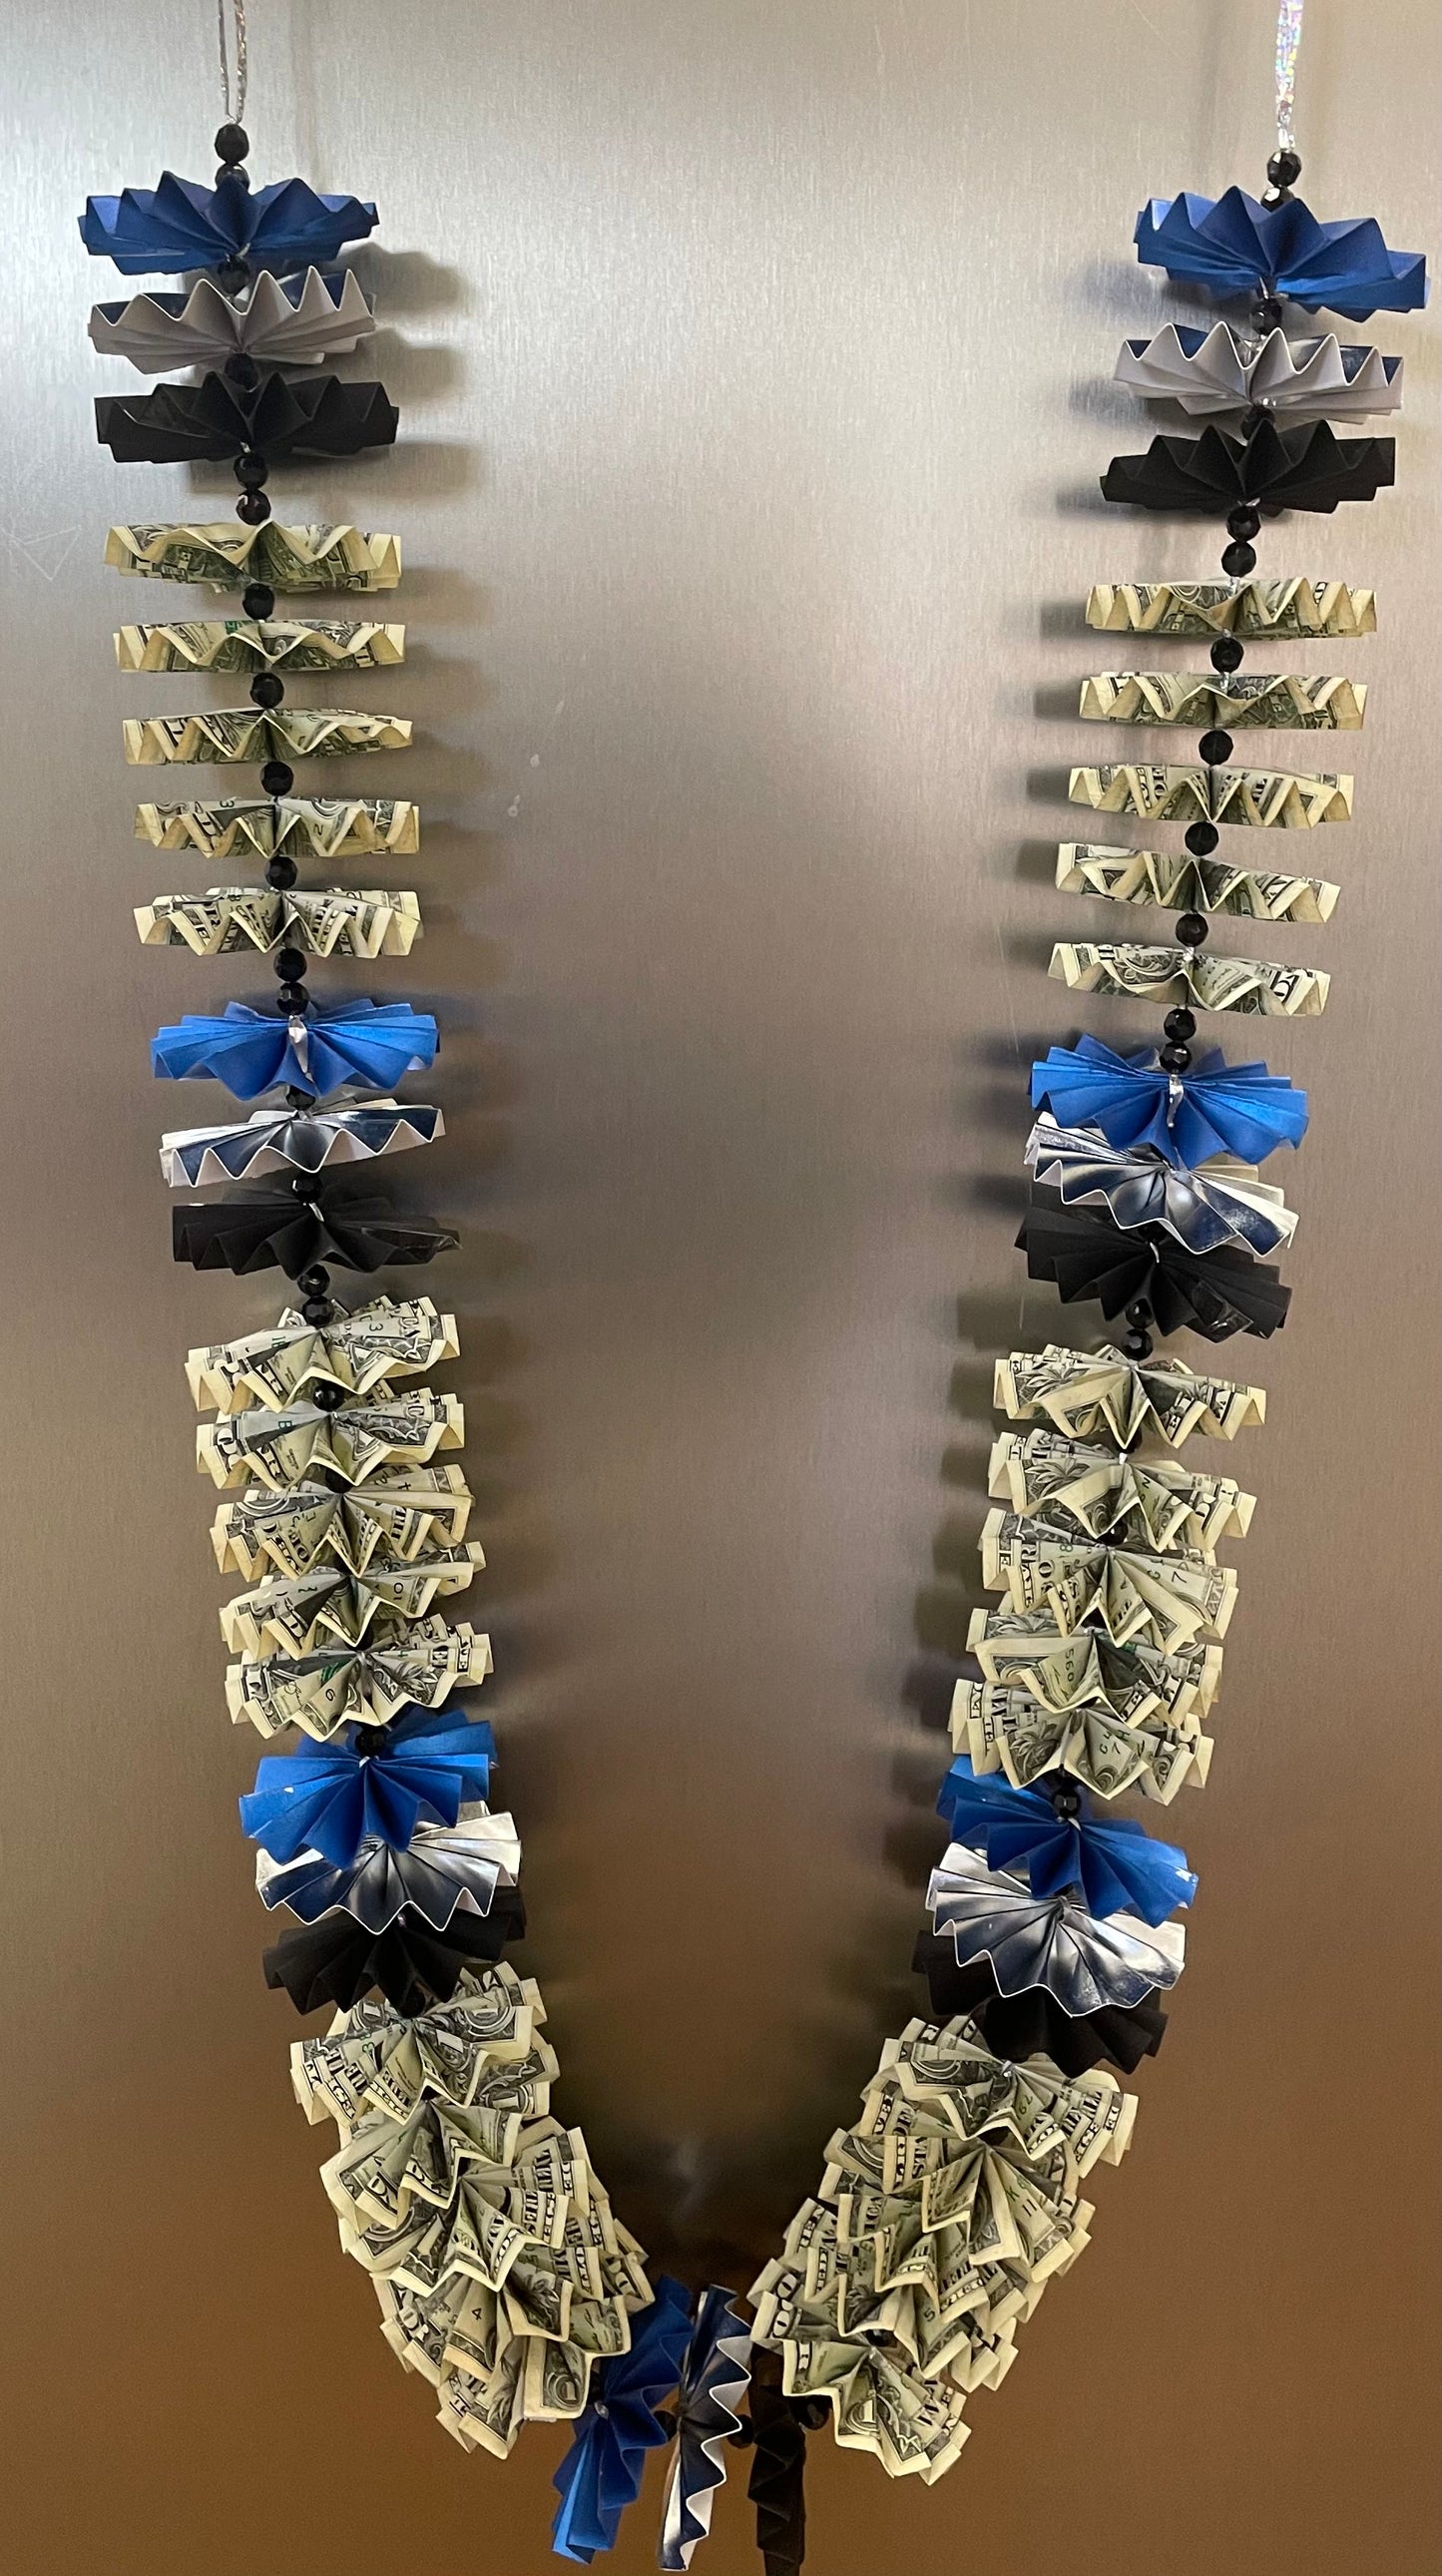 $30 in Cash Royal Blue, Silver, and Black Graduation Money Lei